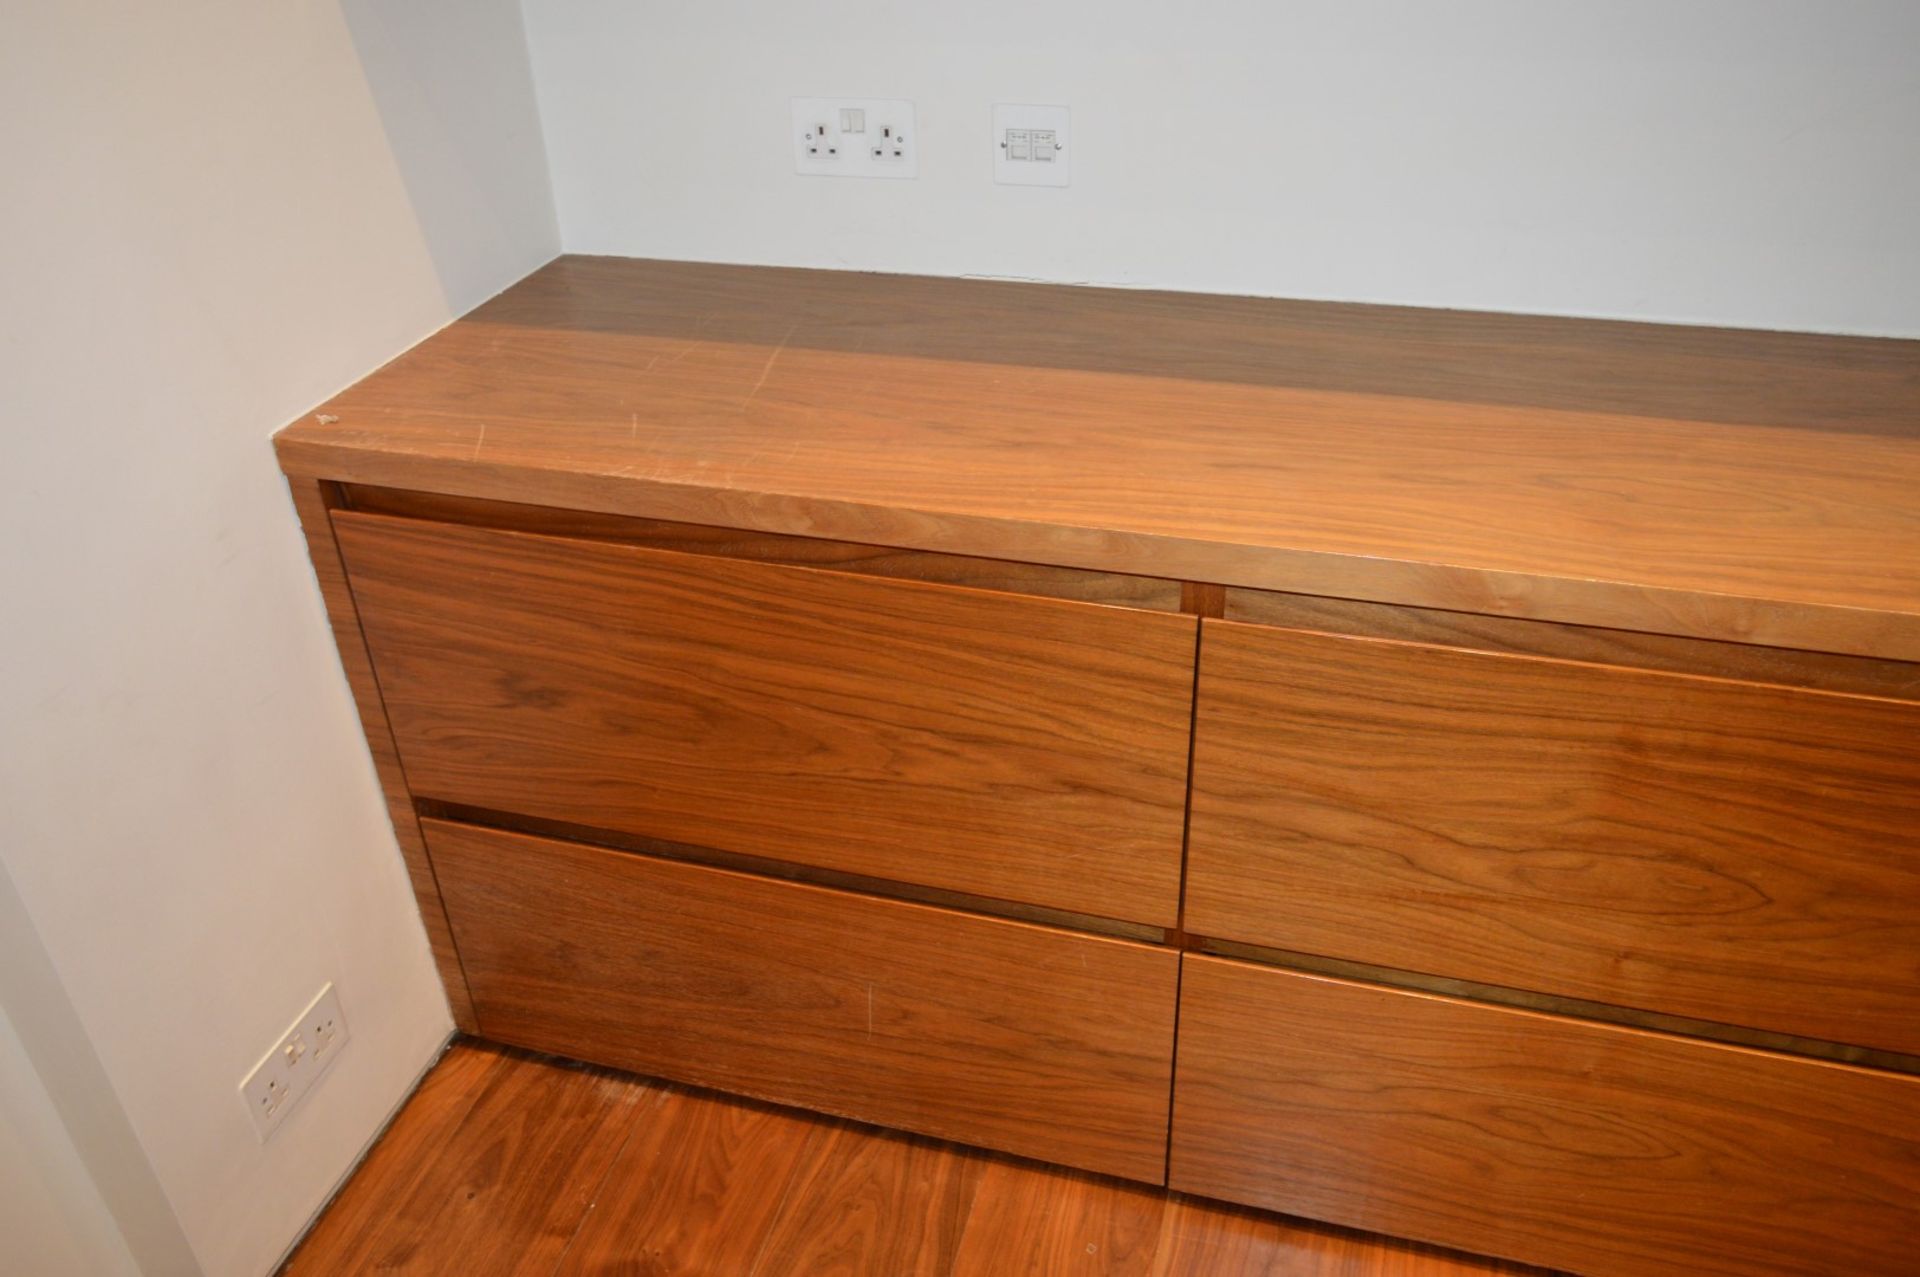 1 x Office Storage Room Including Two Sections of Adjustable Storage Shelvings and Oak Sideboard - Image 13 of 18